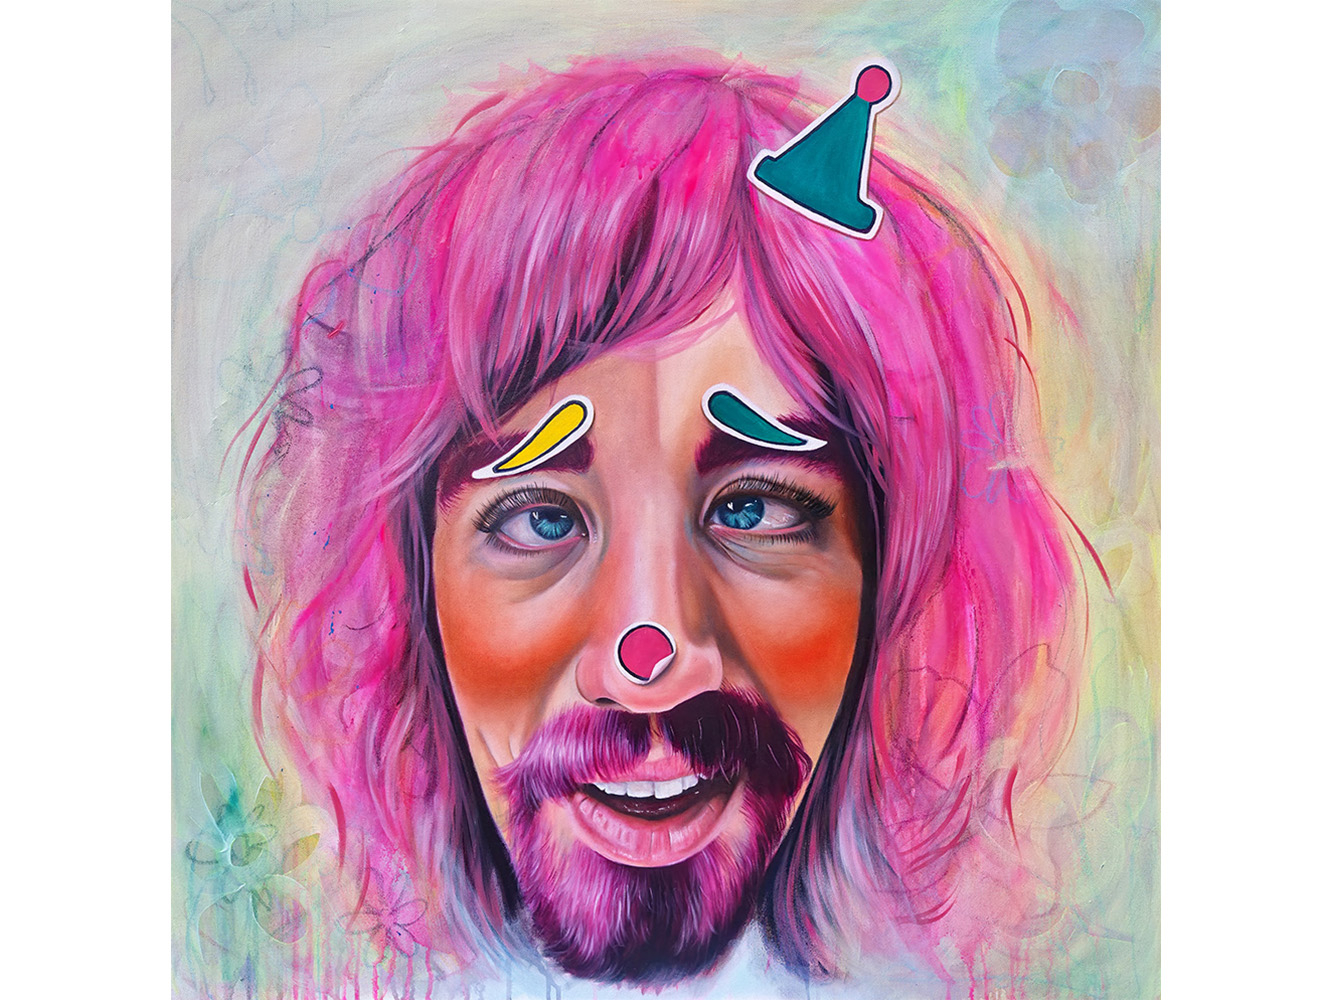 Painting of man with pink hair wearing stickers